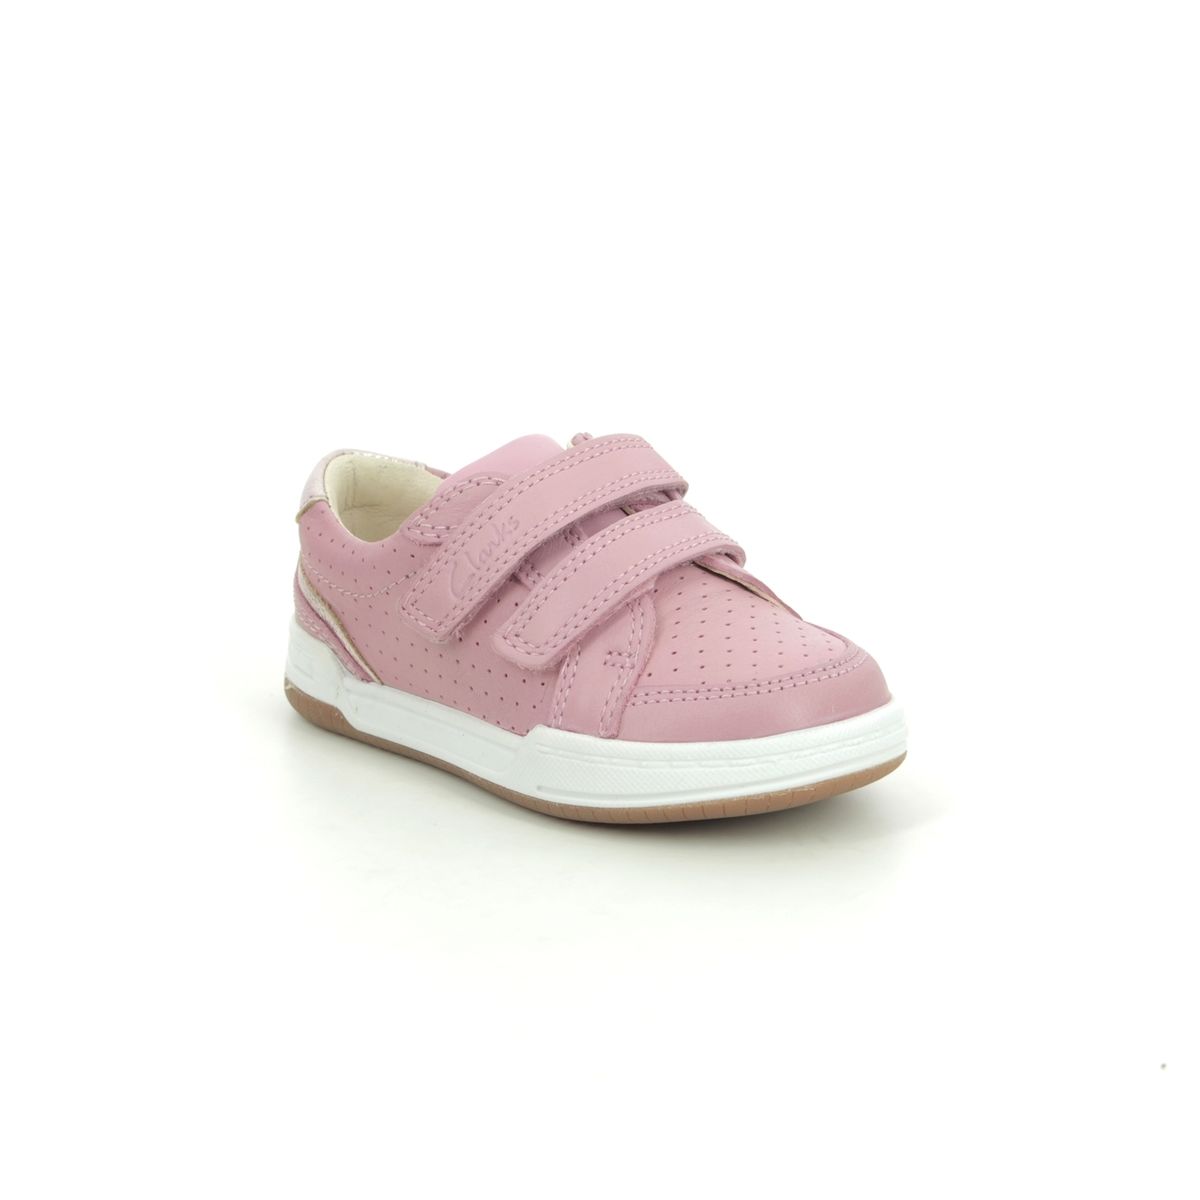 Clarks Fawn Solo T Pink Leather Kids First And Toddler 589895E In Size 9 In Plain Pink Leather E Width Fitting Narrow Fit For kids